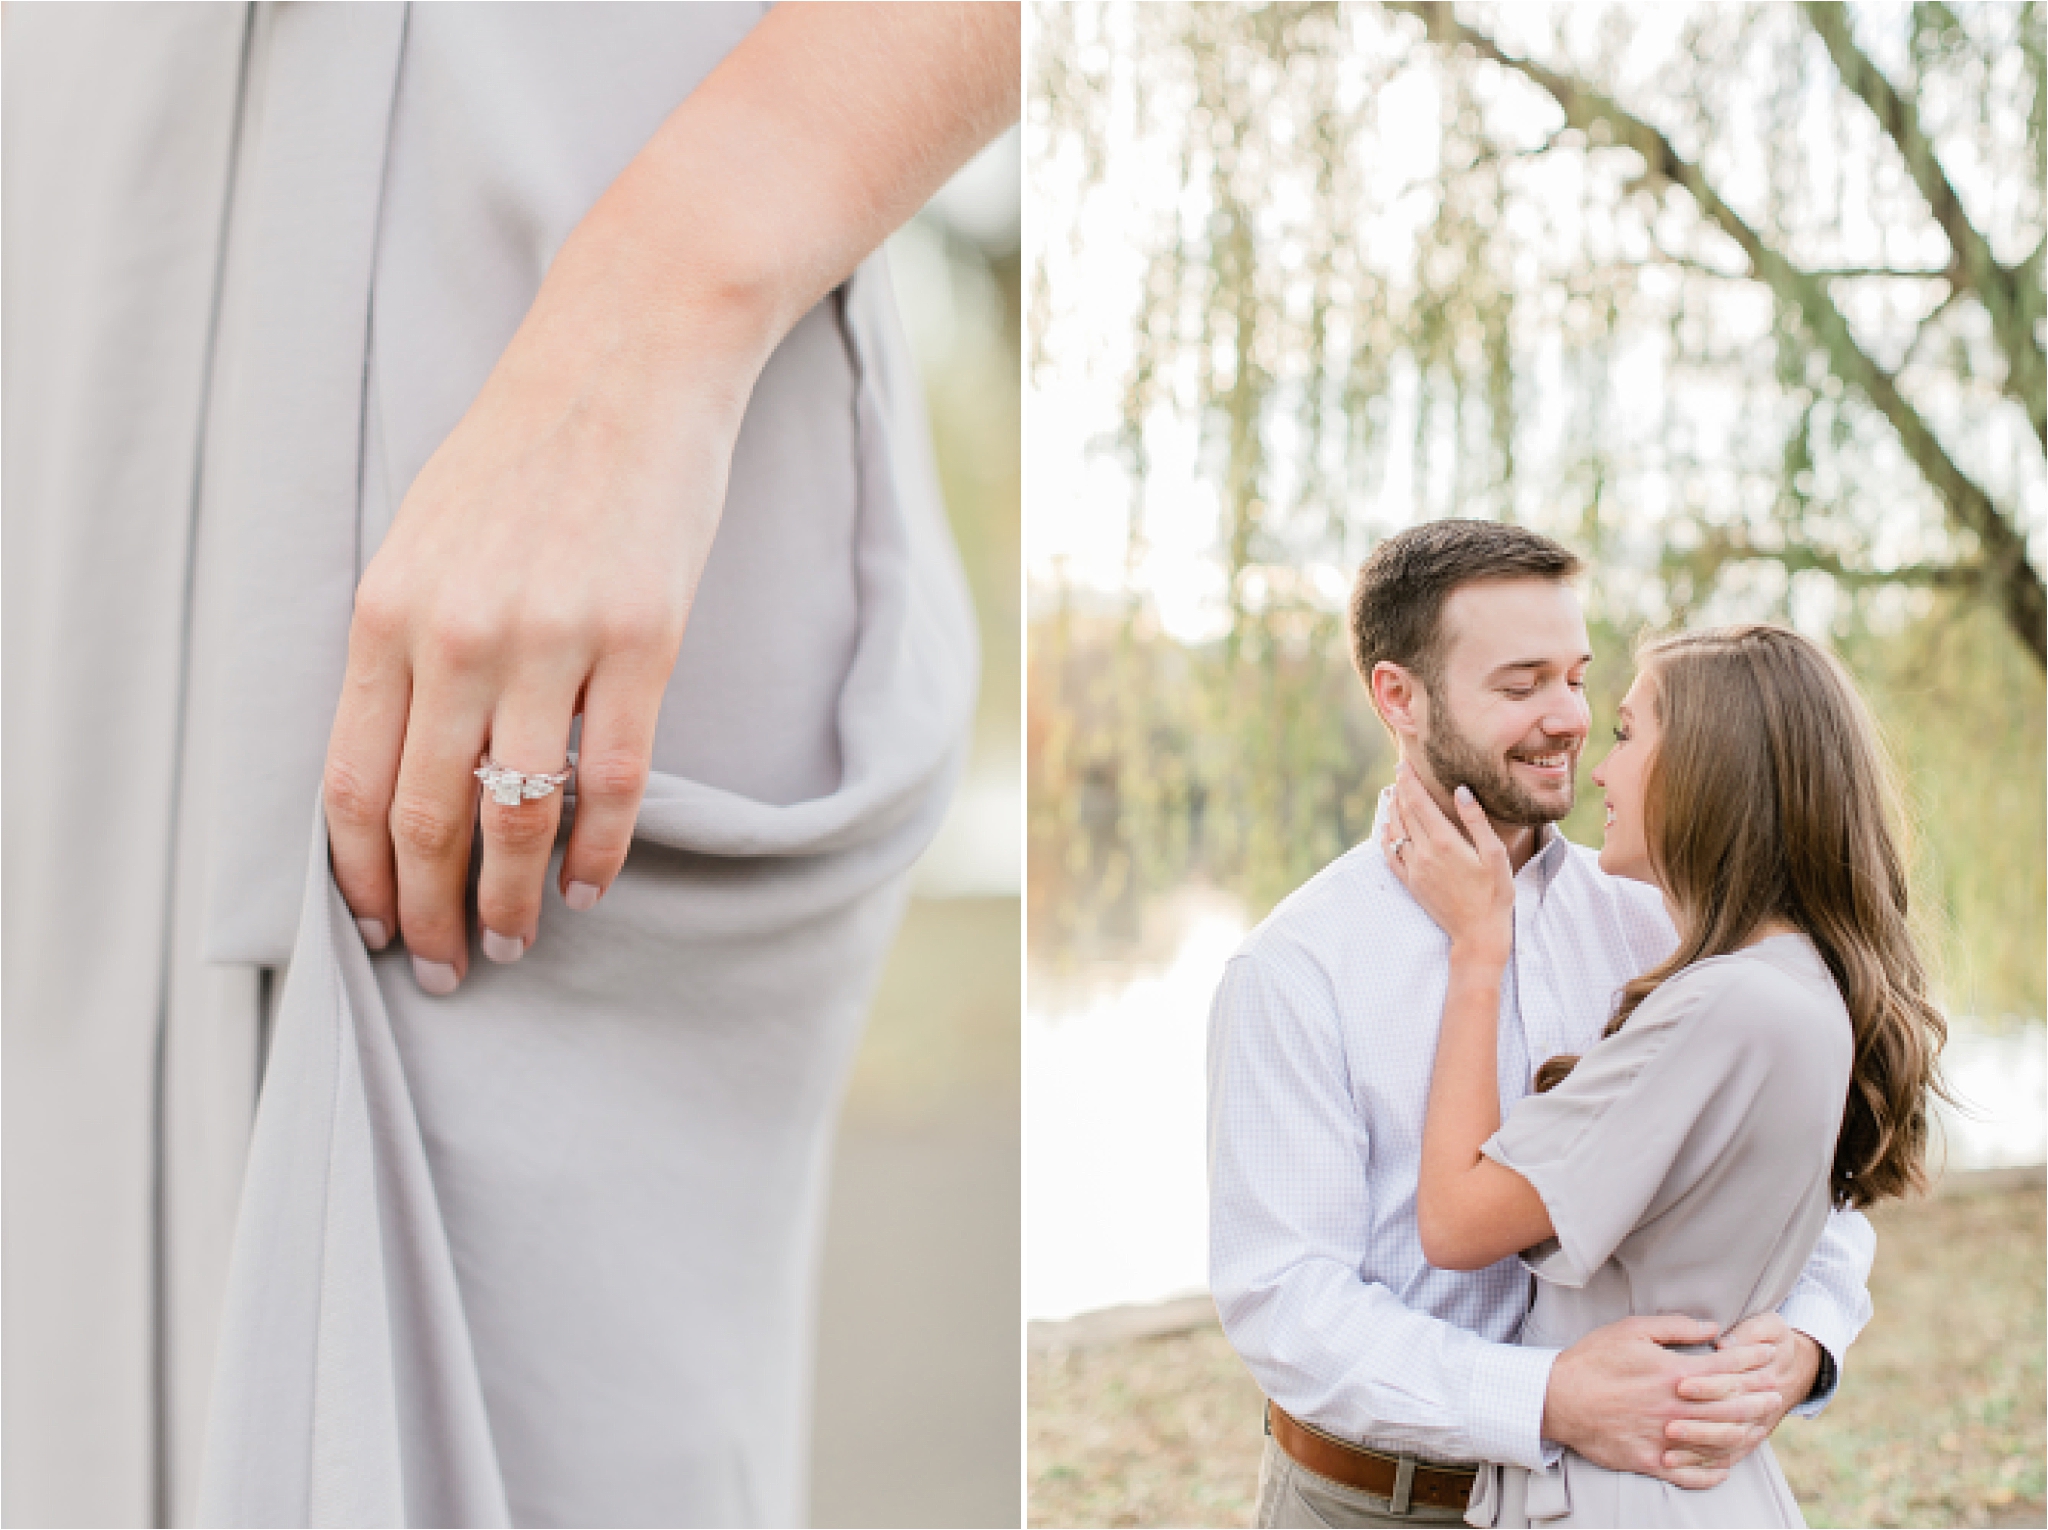 To see more images of this Centennial Park, Nashville Fall engagement session visit www.whitneywoodall.com.